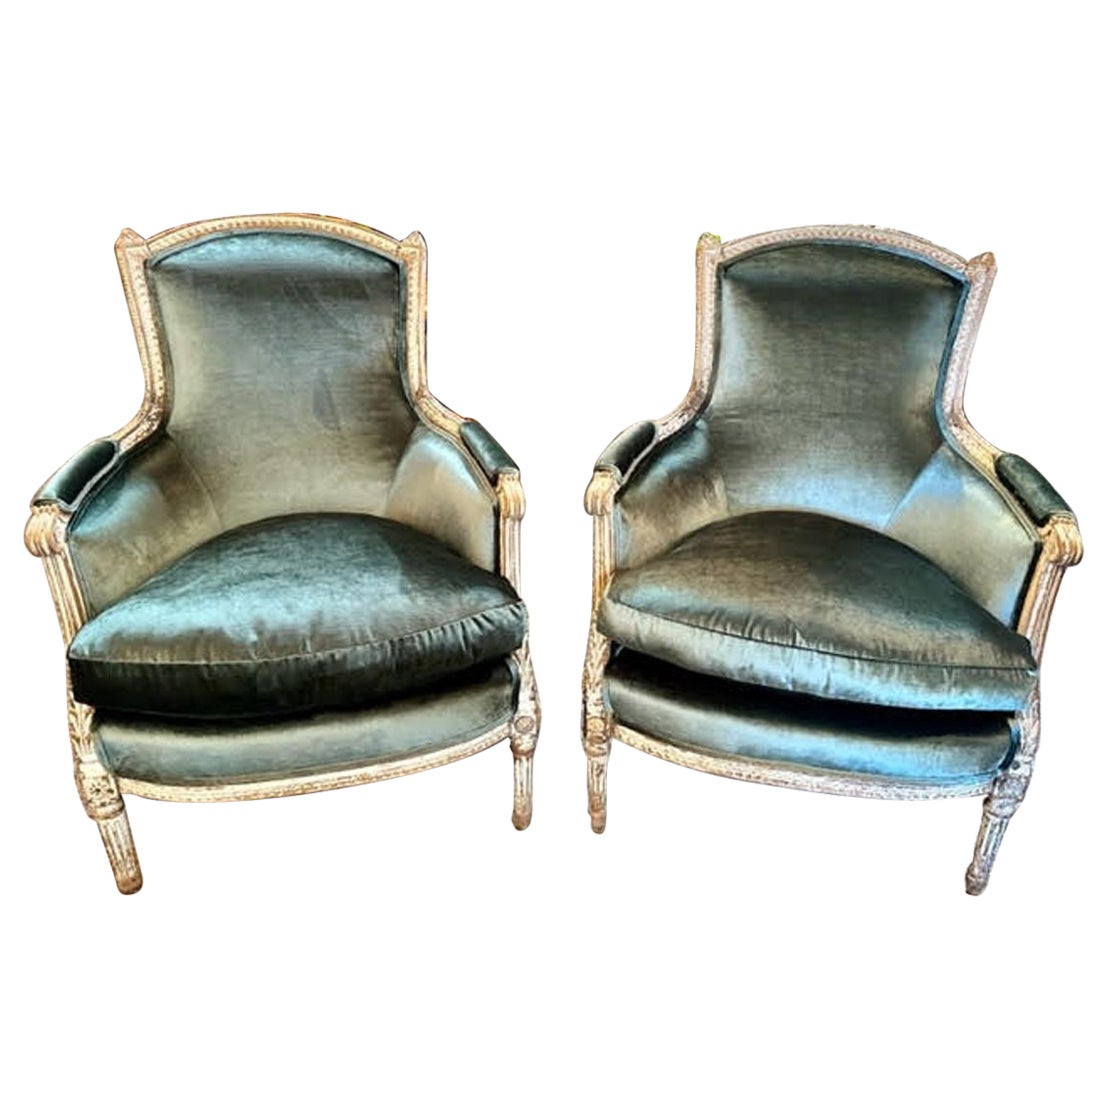 Pair of 18th Century Louis XVI Chairs with Velvet Upholstery For Sale